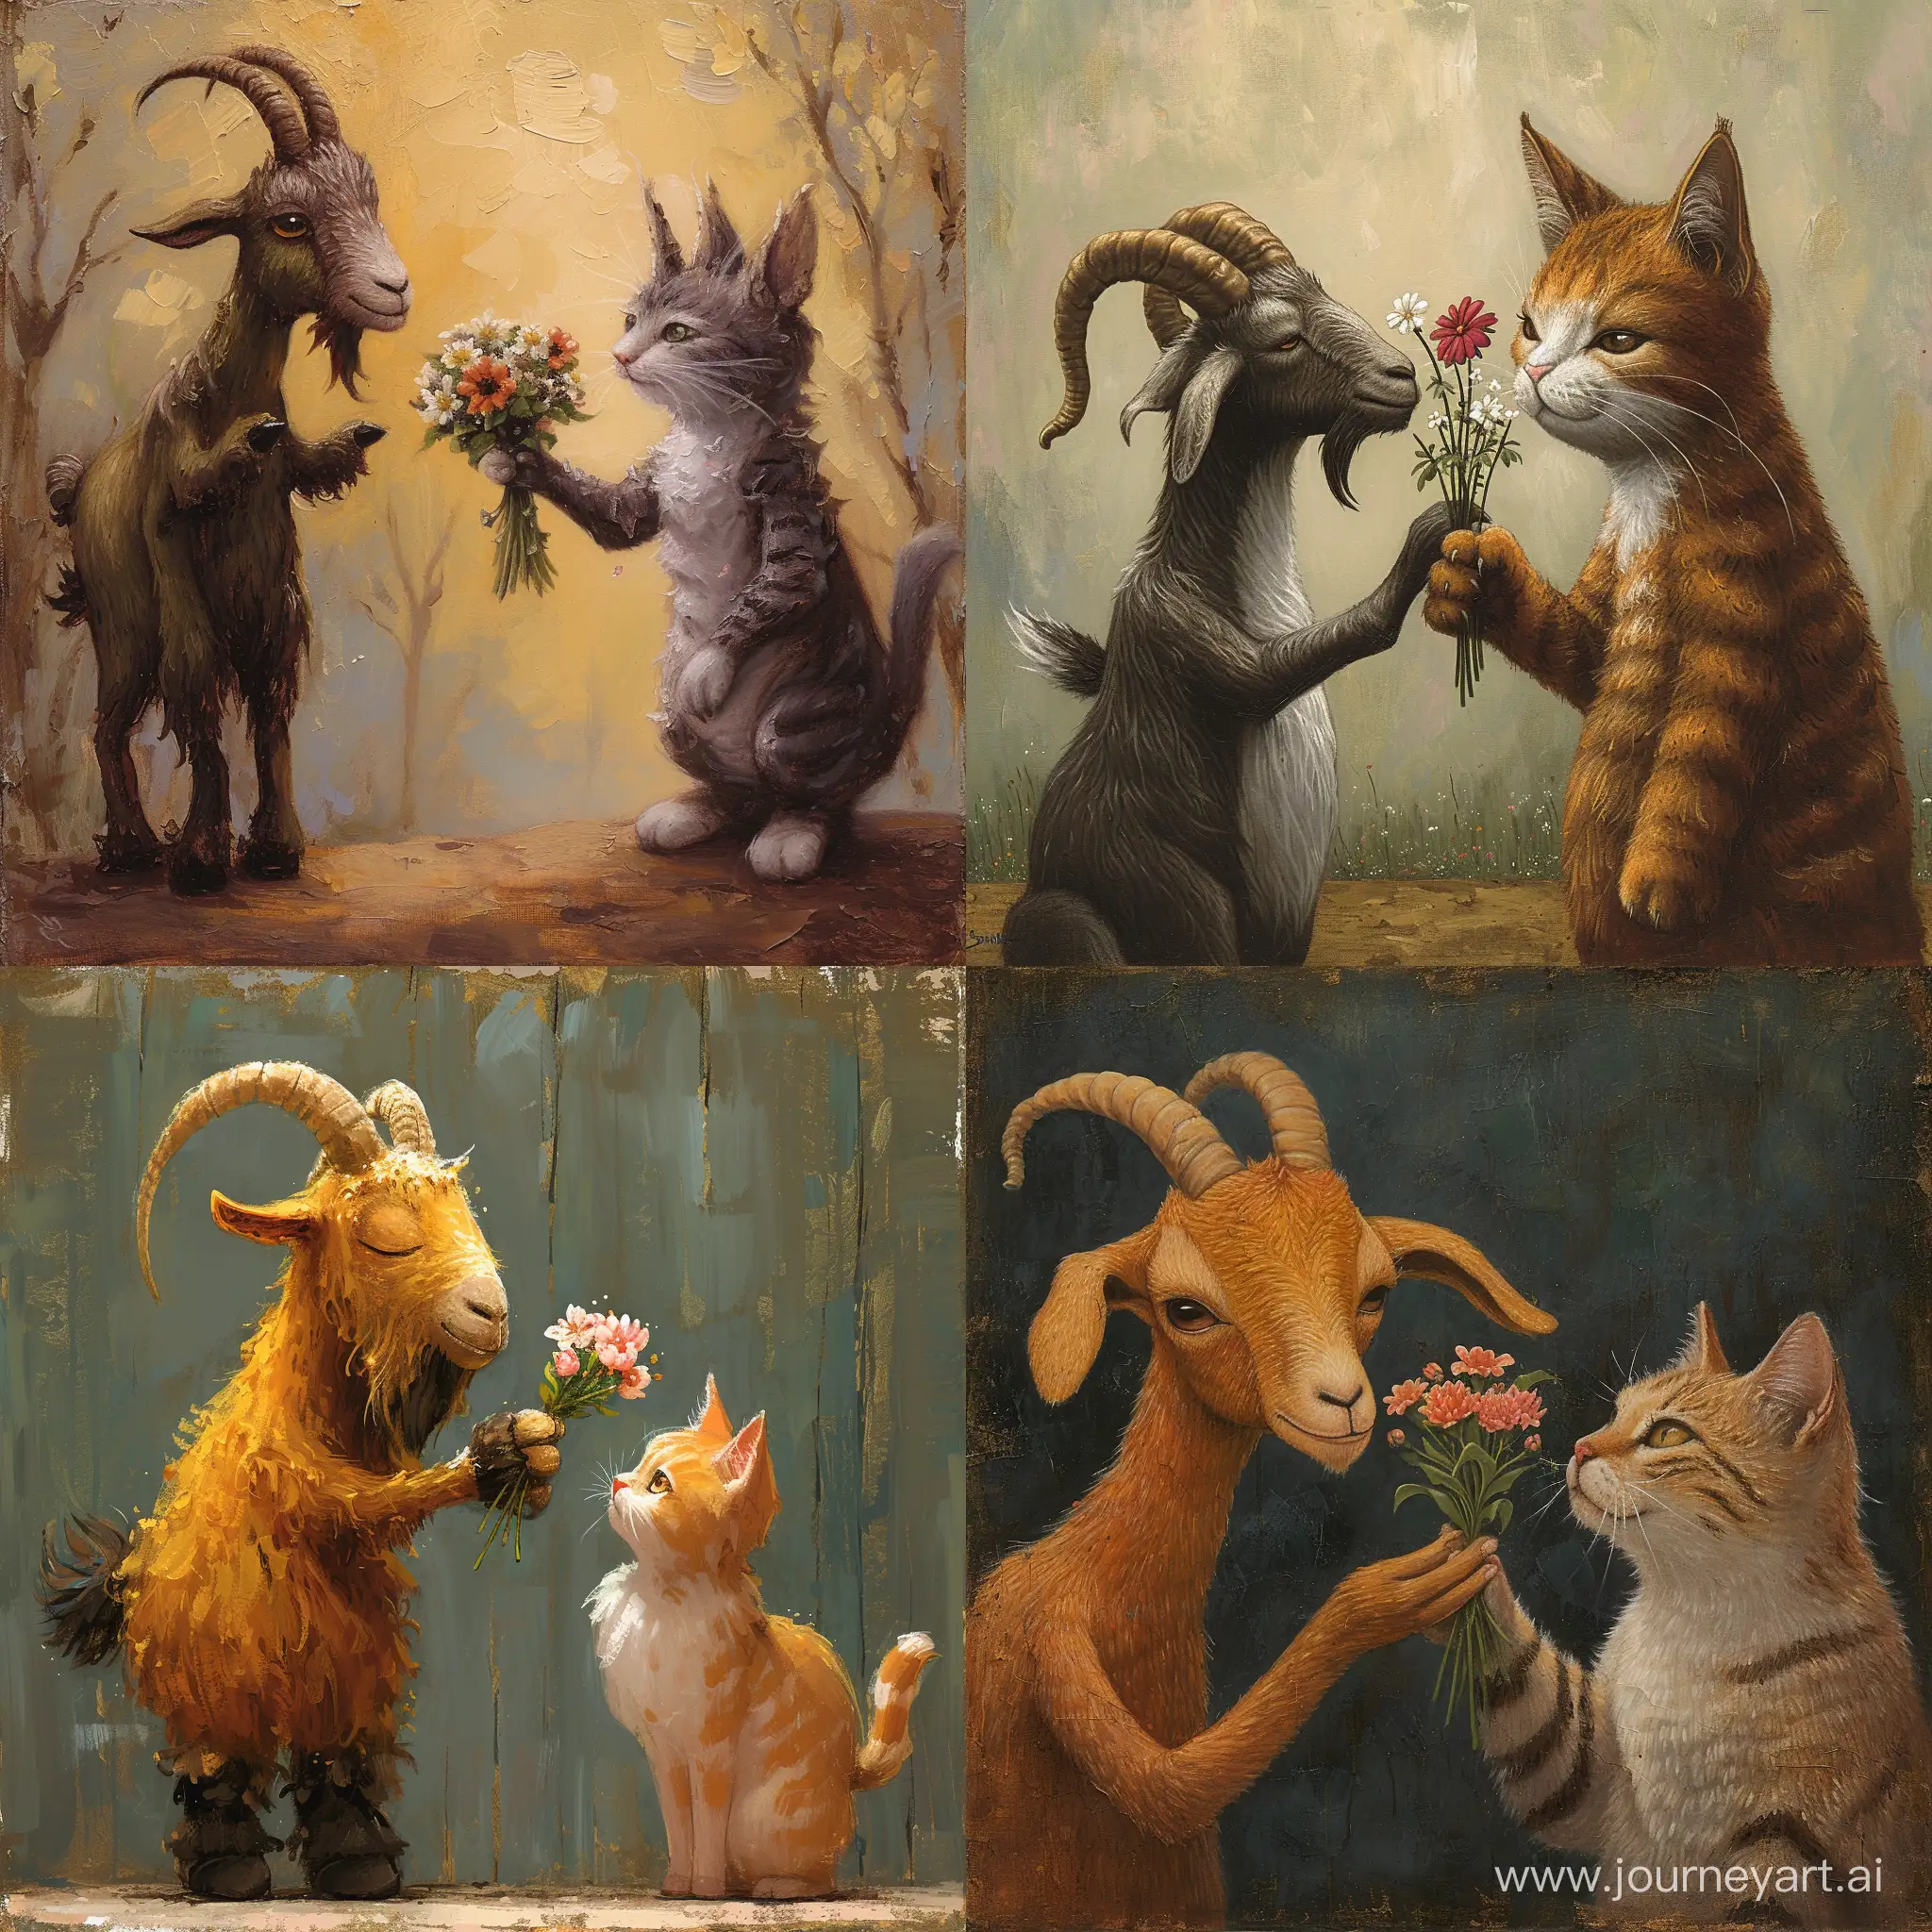 Adorable-Goat-Furry-Presents-Flowers-to-Cat-Furry-in-Charming-Online-Painting